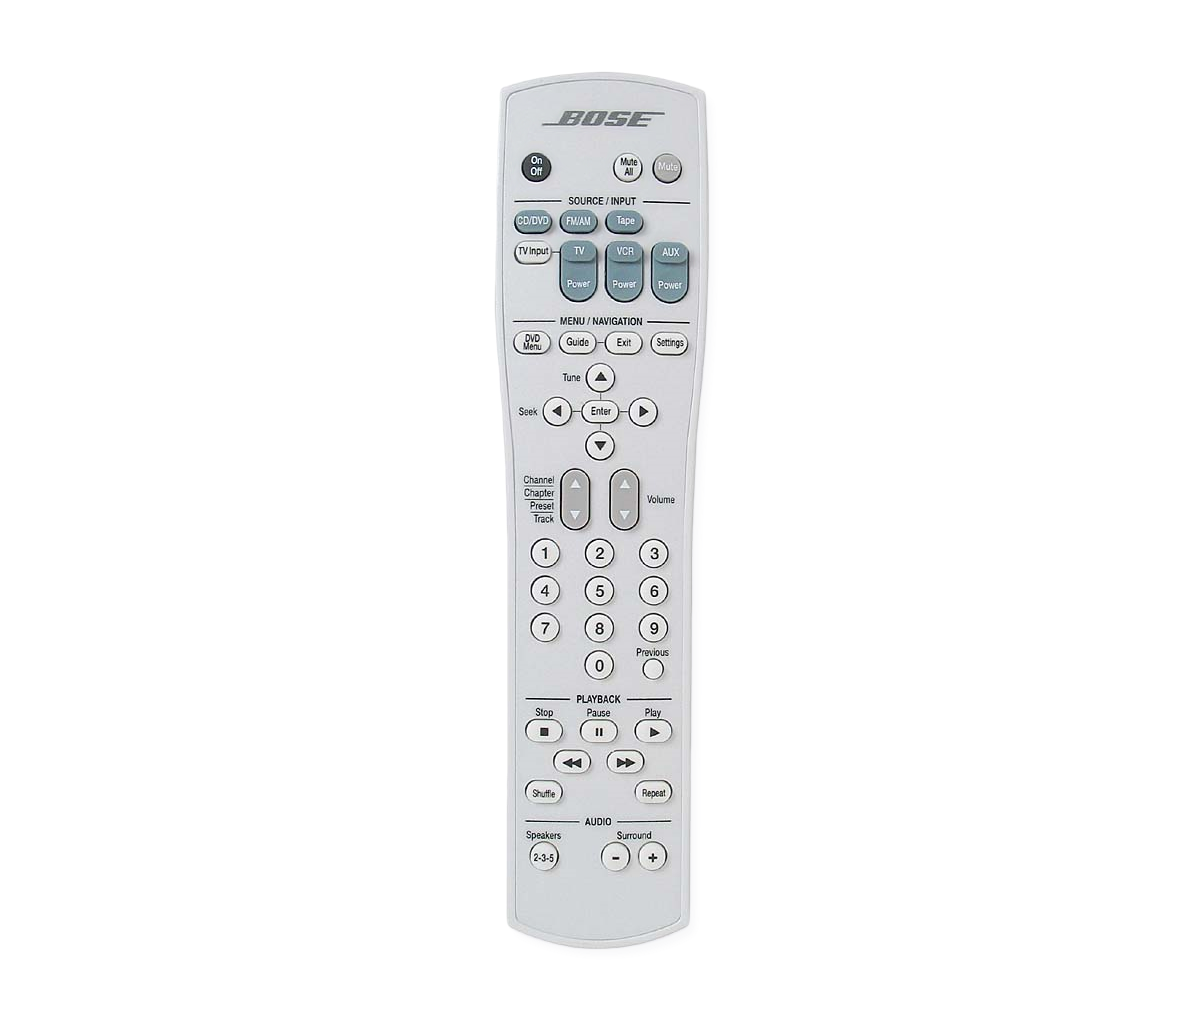 fly Mekaniker prinsesse Buy Bose RC28T1-27 Remote Control For Lifestyle 18 online Worldwide -  Tejar.com